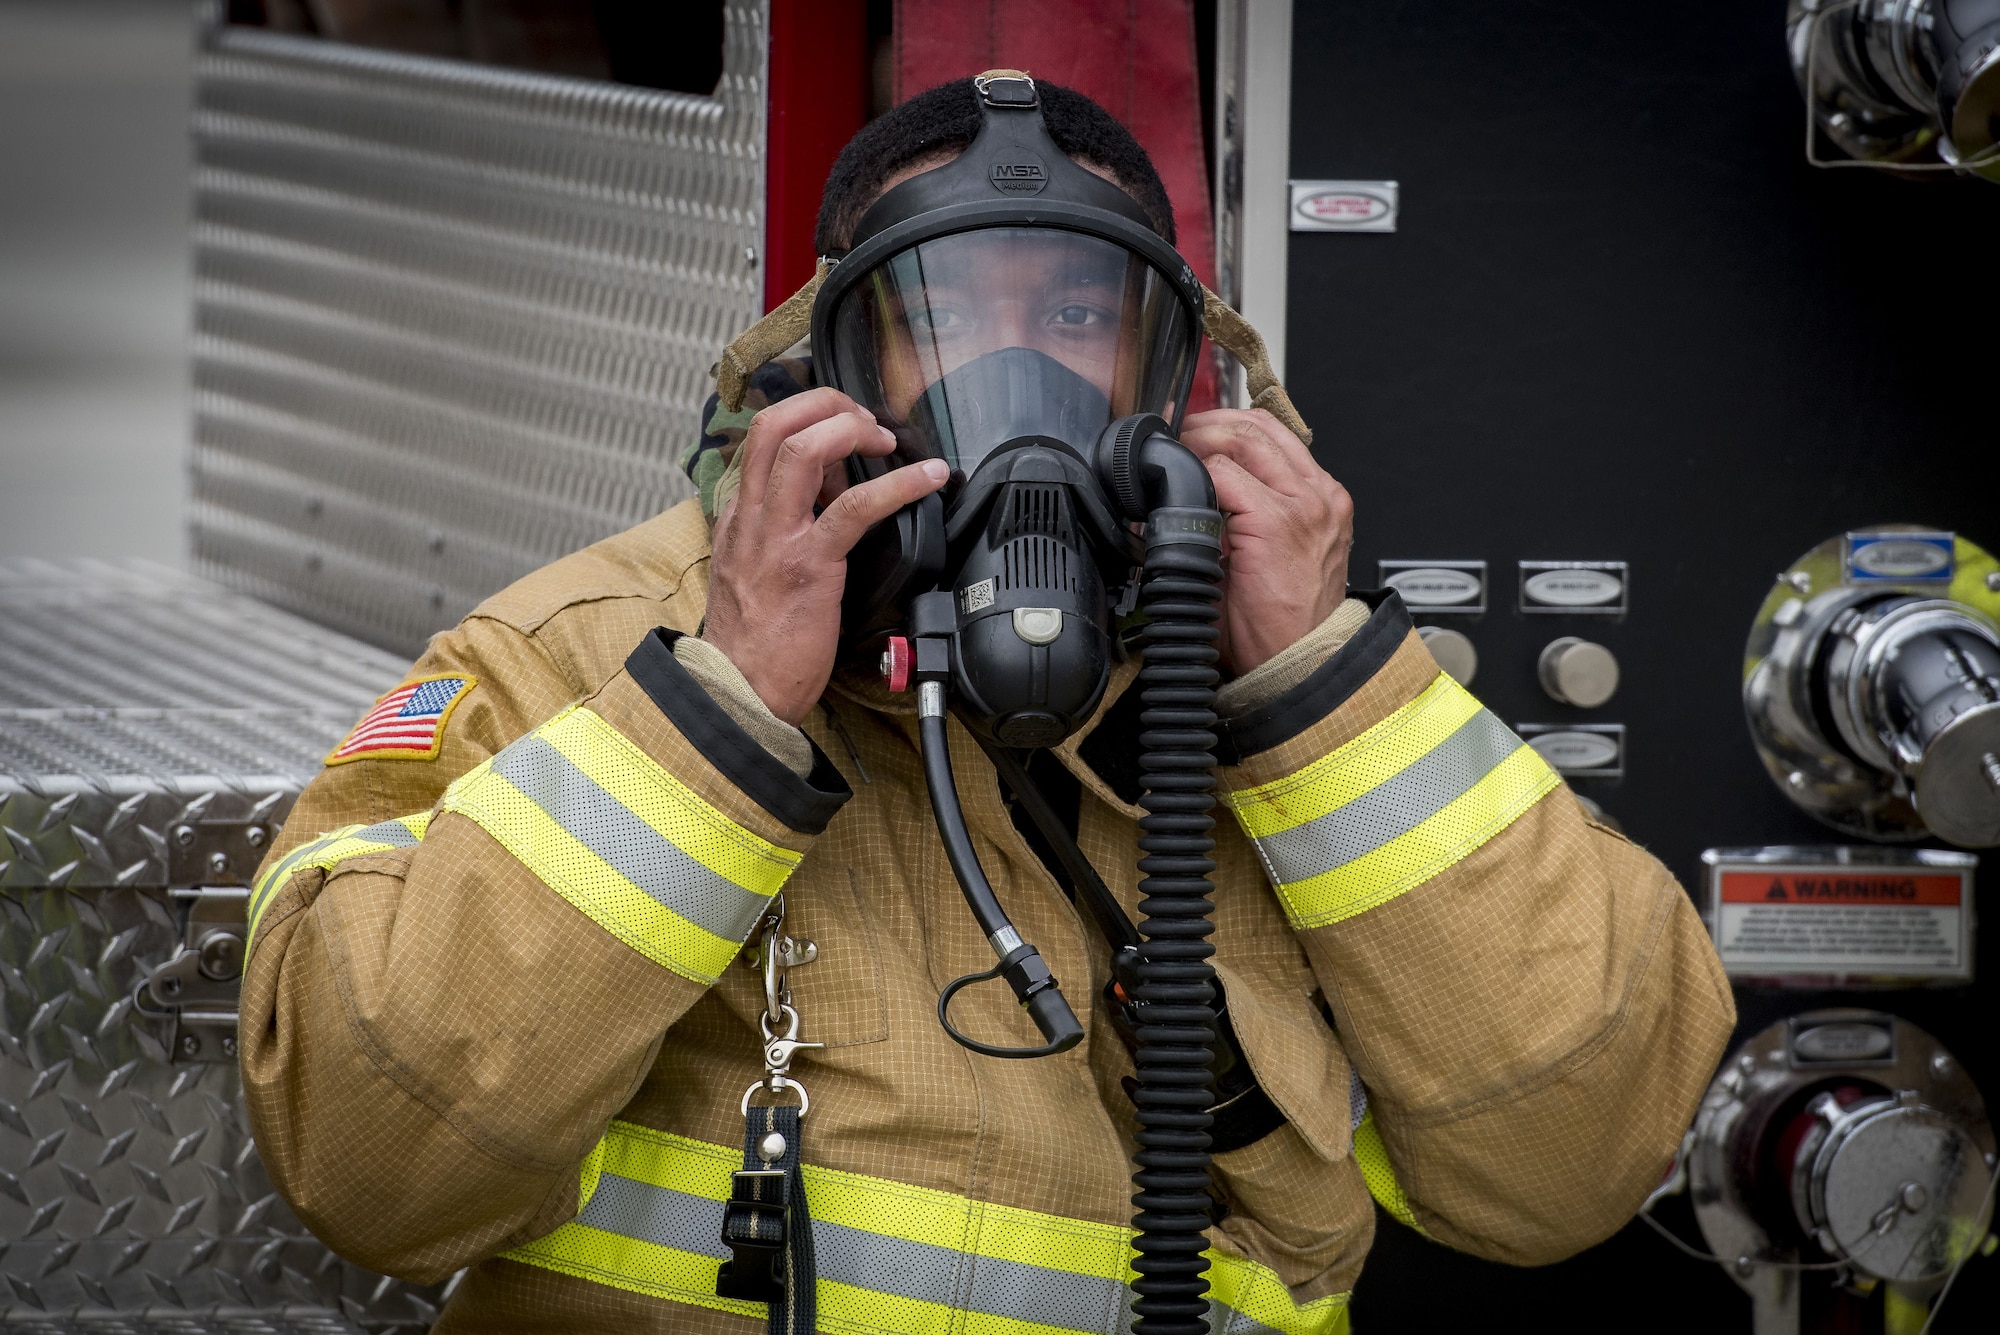 A 374th Civil Engineer Squadron firefighter prepares to remove his gas mask during exercise Beverly Morning 17-08 in conjunction with exercise Vigilant Ace 18, Dec. 4, 2017, at Yokota Air Base, Japan.